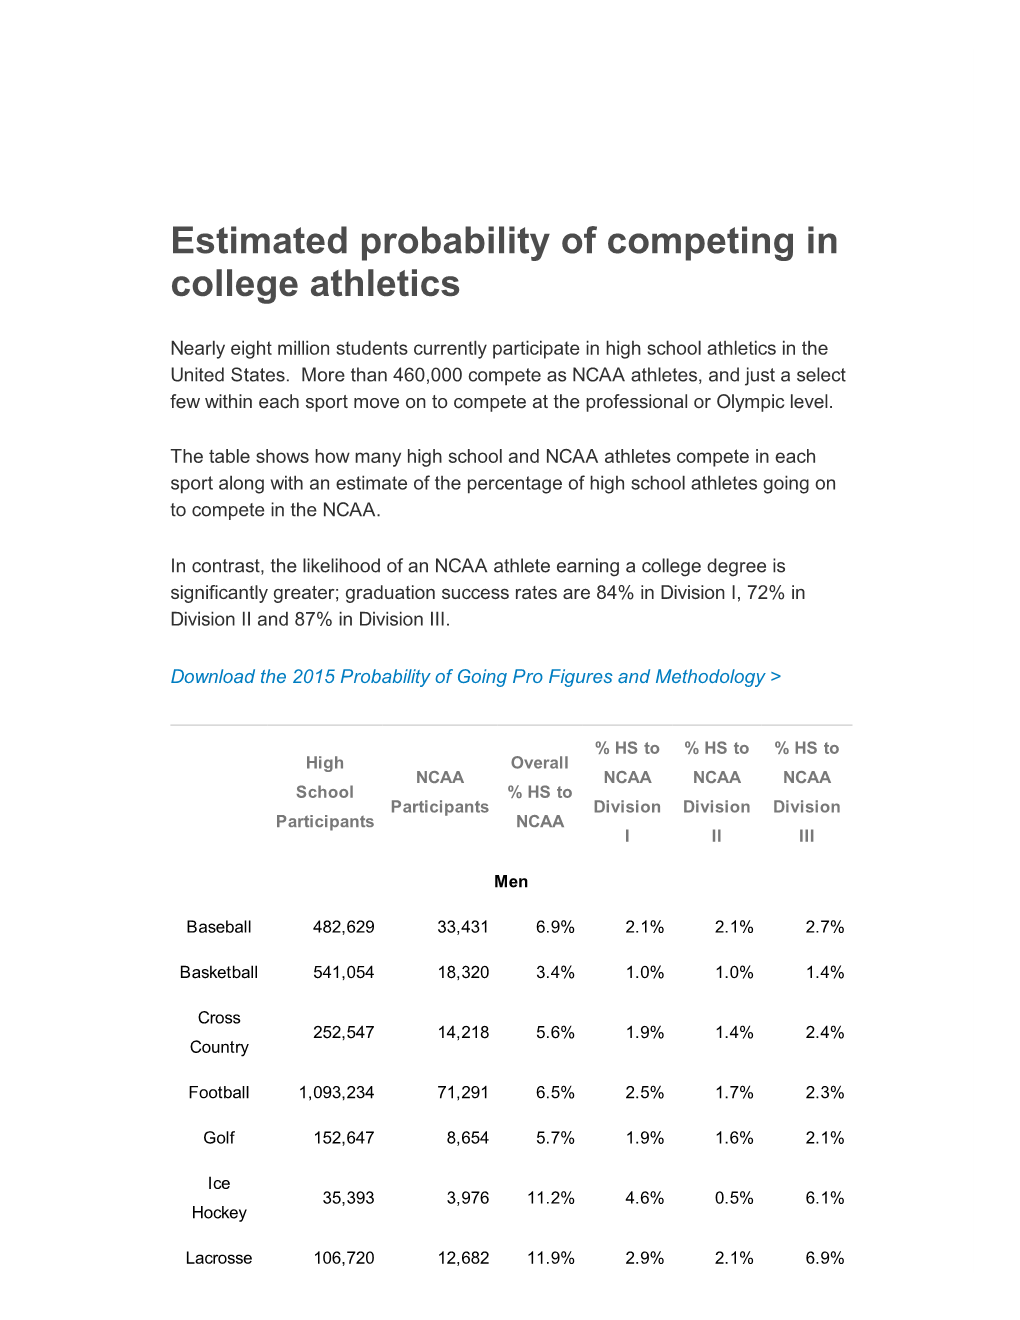 Estimated Probability of Competing in College Athletics | NCAA.Org ­ the Official Site of the NCAA